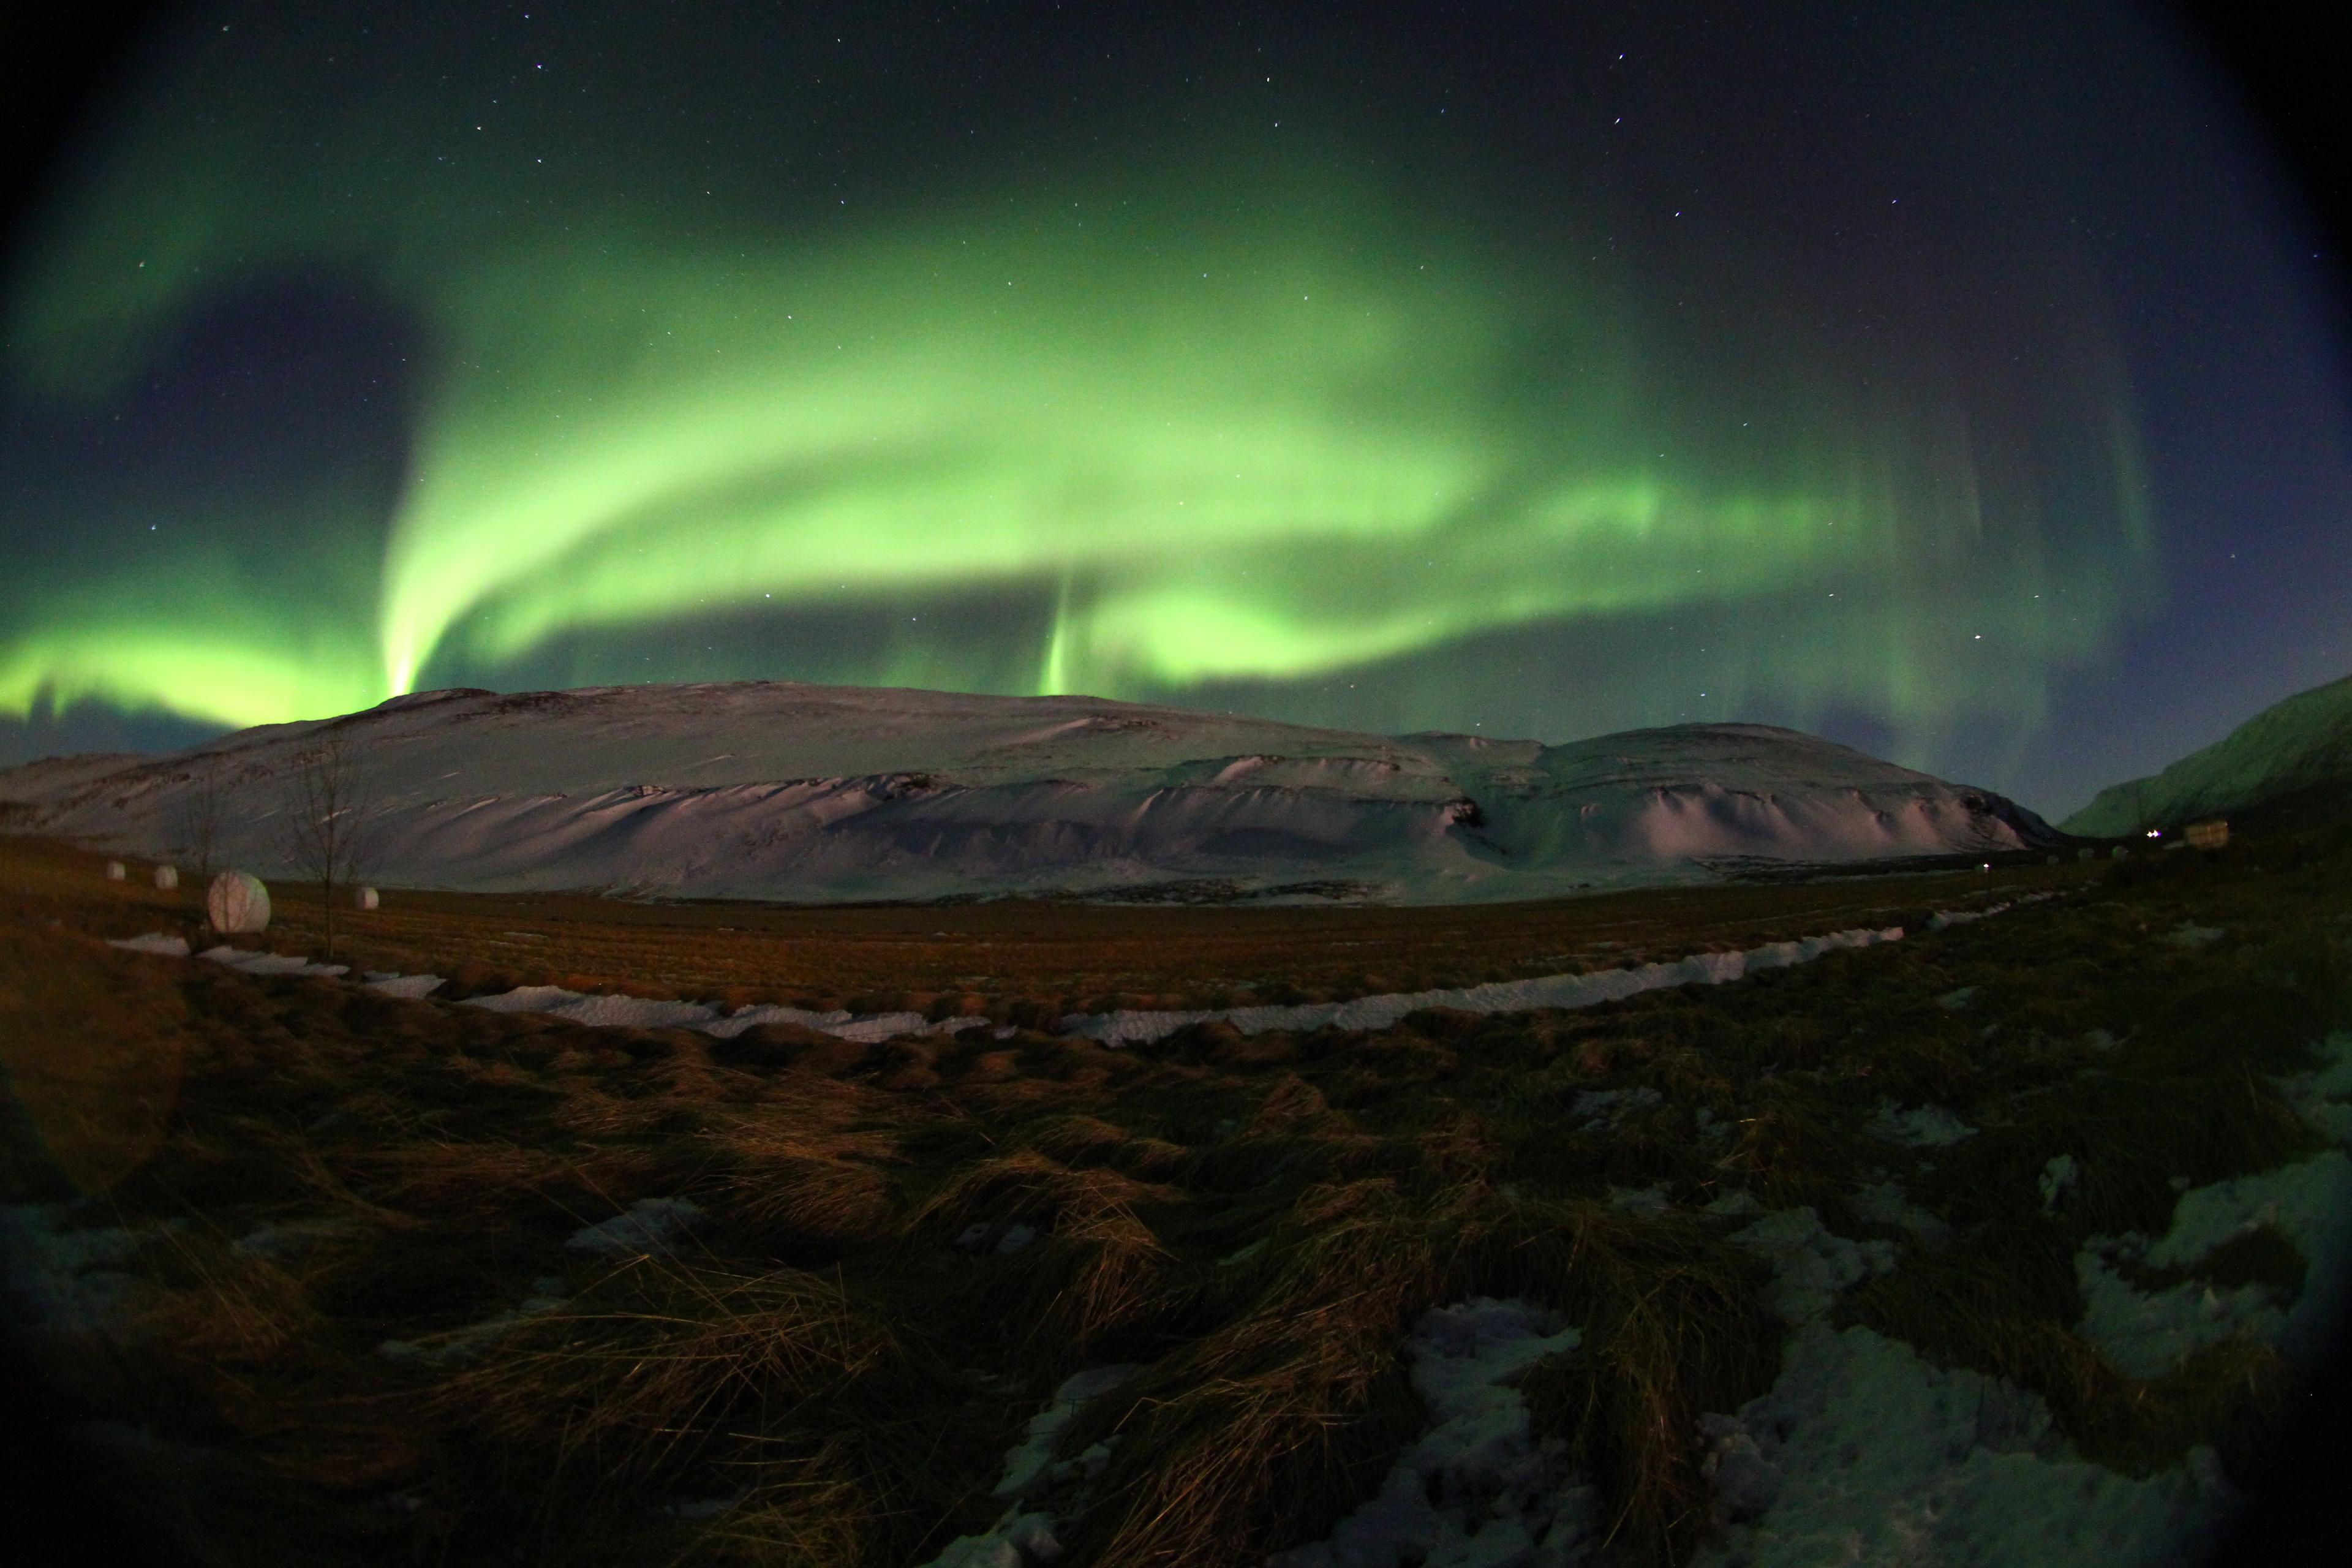 Northern lights hovering over a snow capped mountain in Iceland.